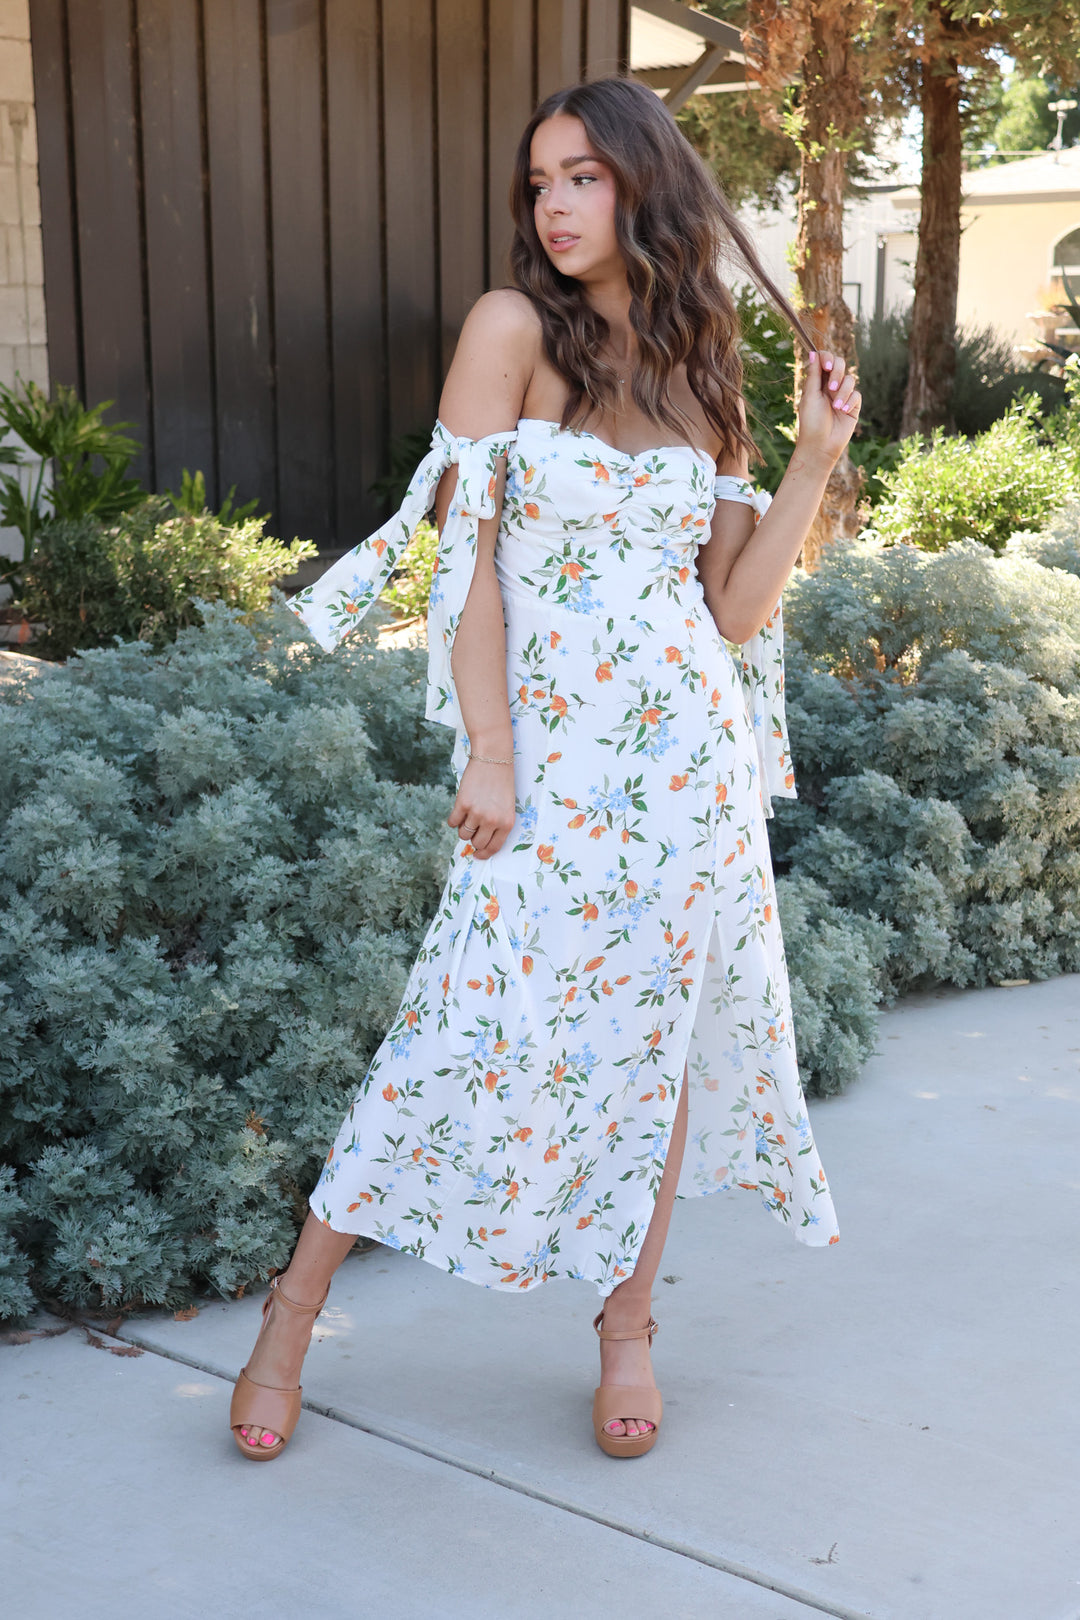 Brunch with the Bride Dress - ShopSpoiled